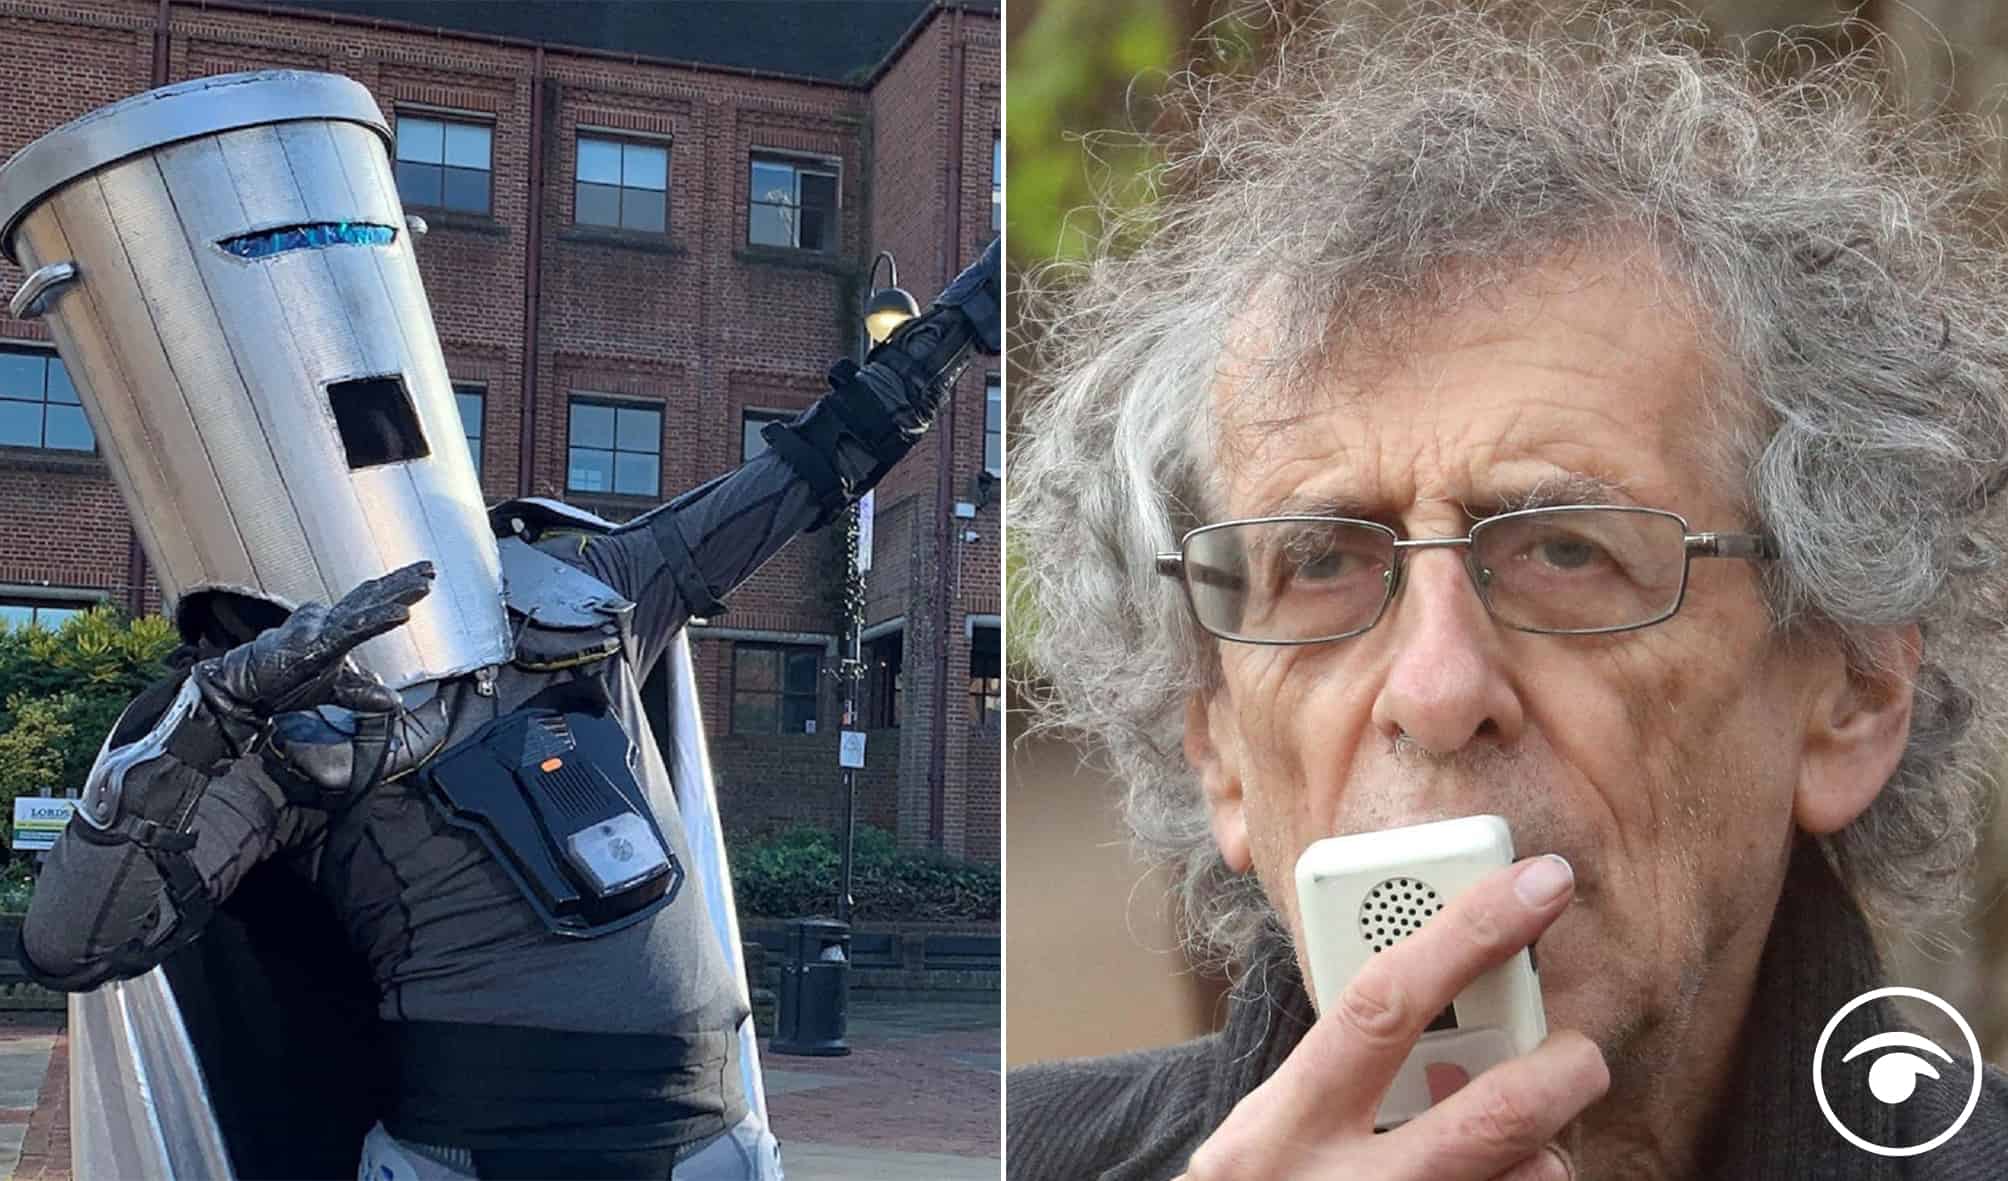 Watch: Count Binface owns Piers Corbyn for removing Covid-19 signage on tube